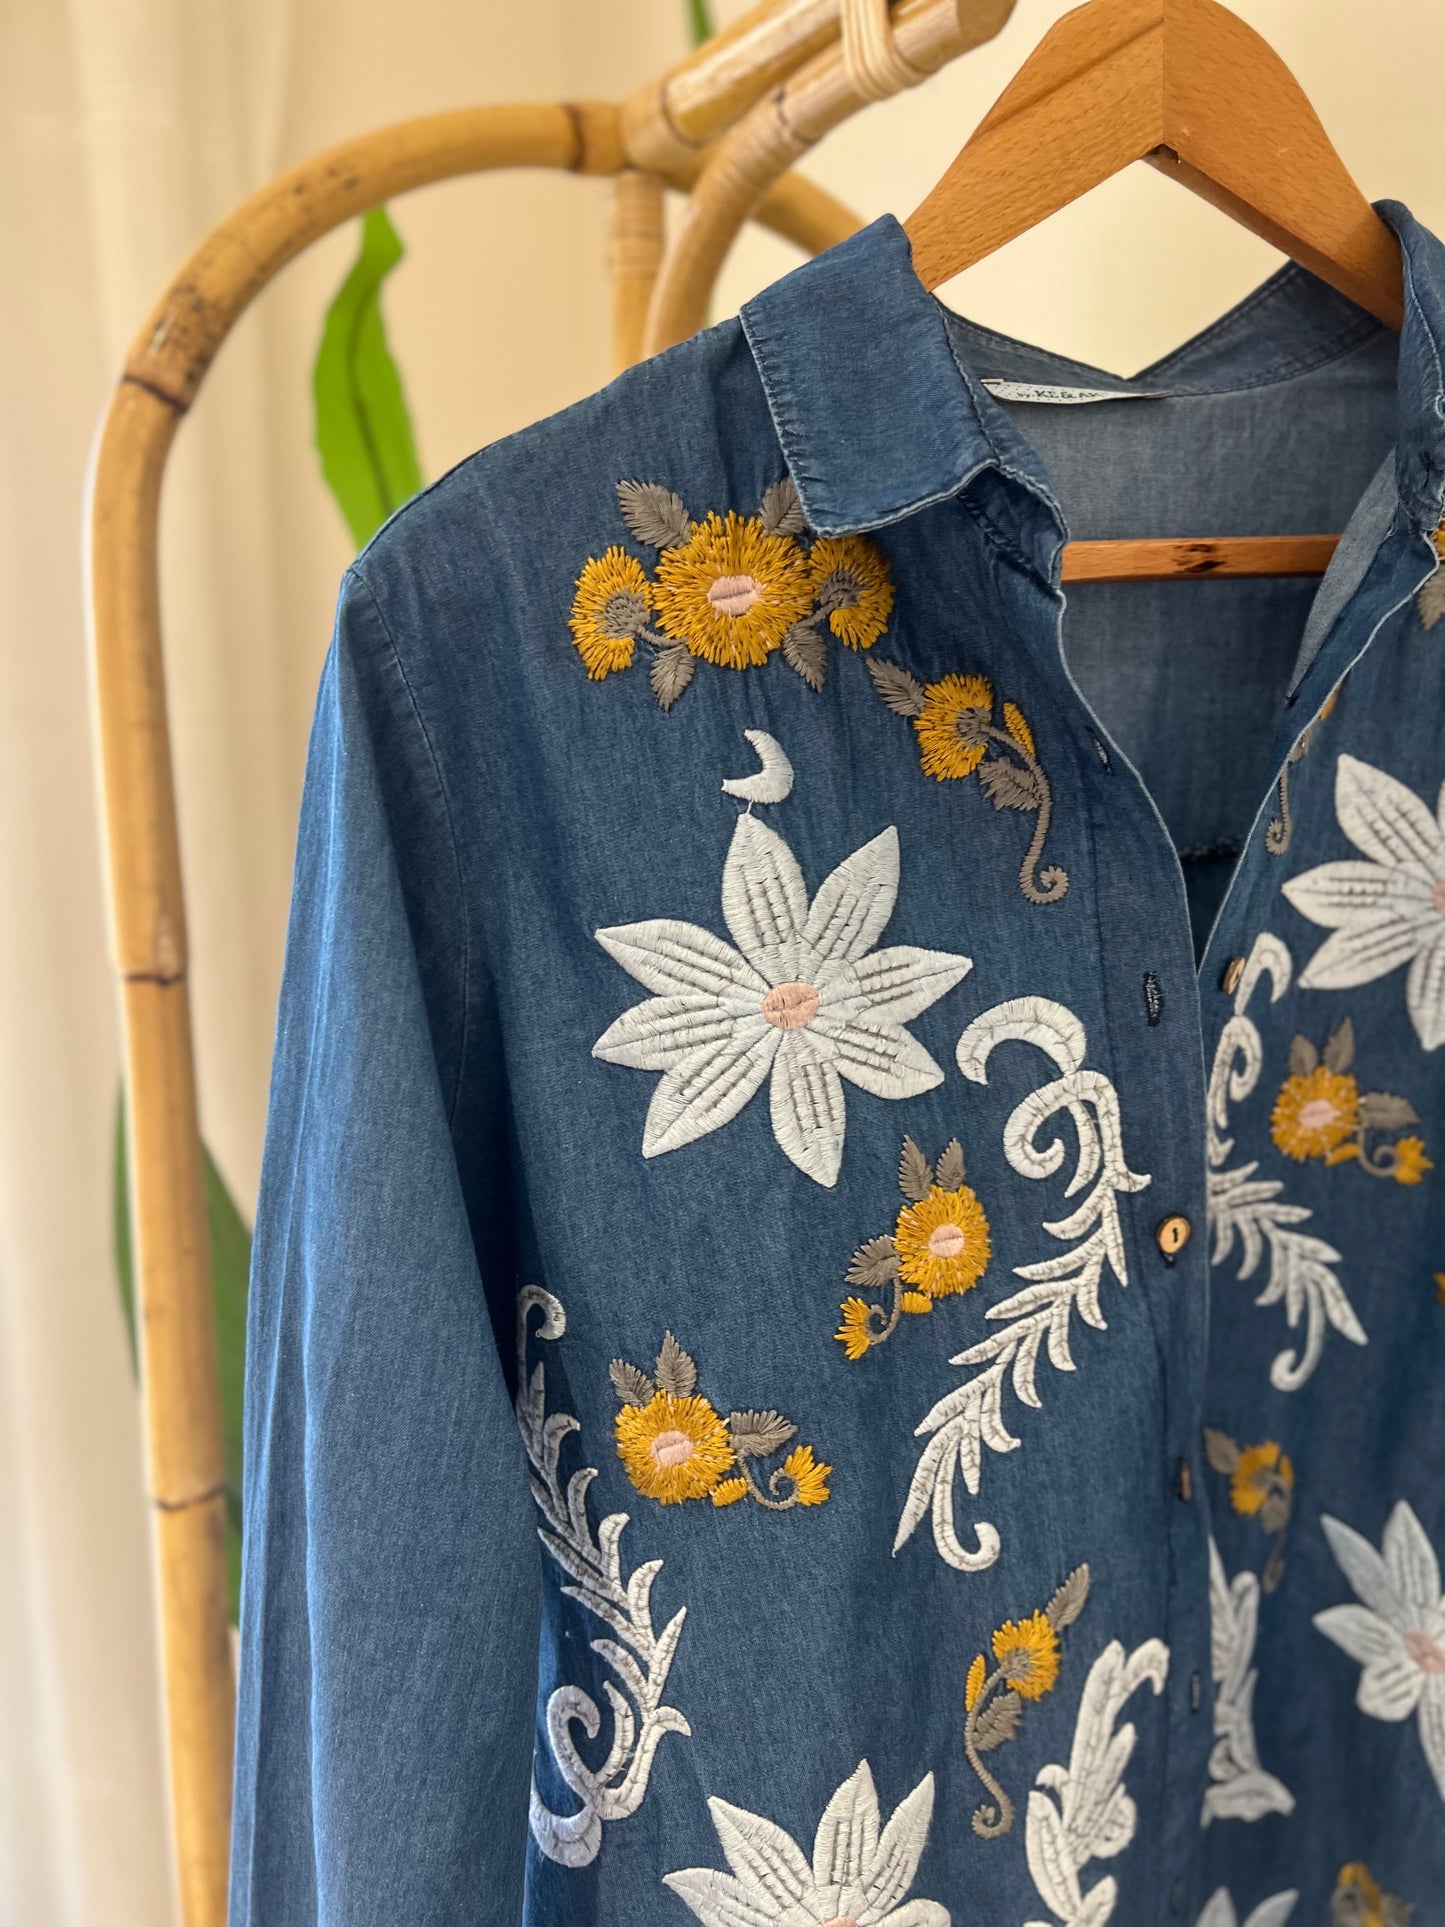 Cotton Jeans Embroidered Shirt